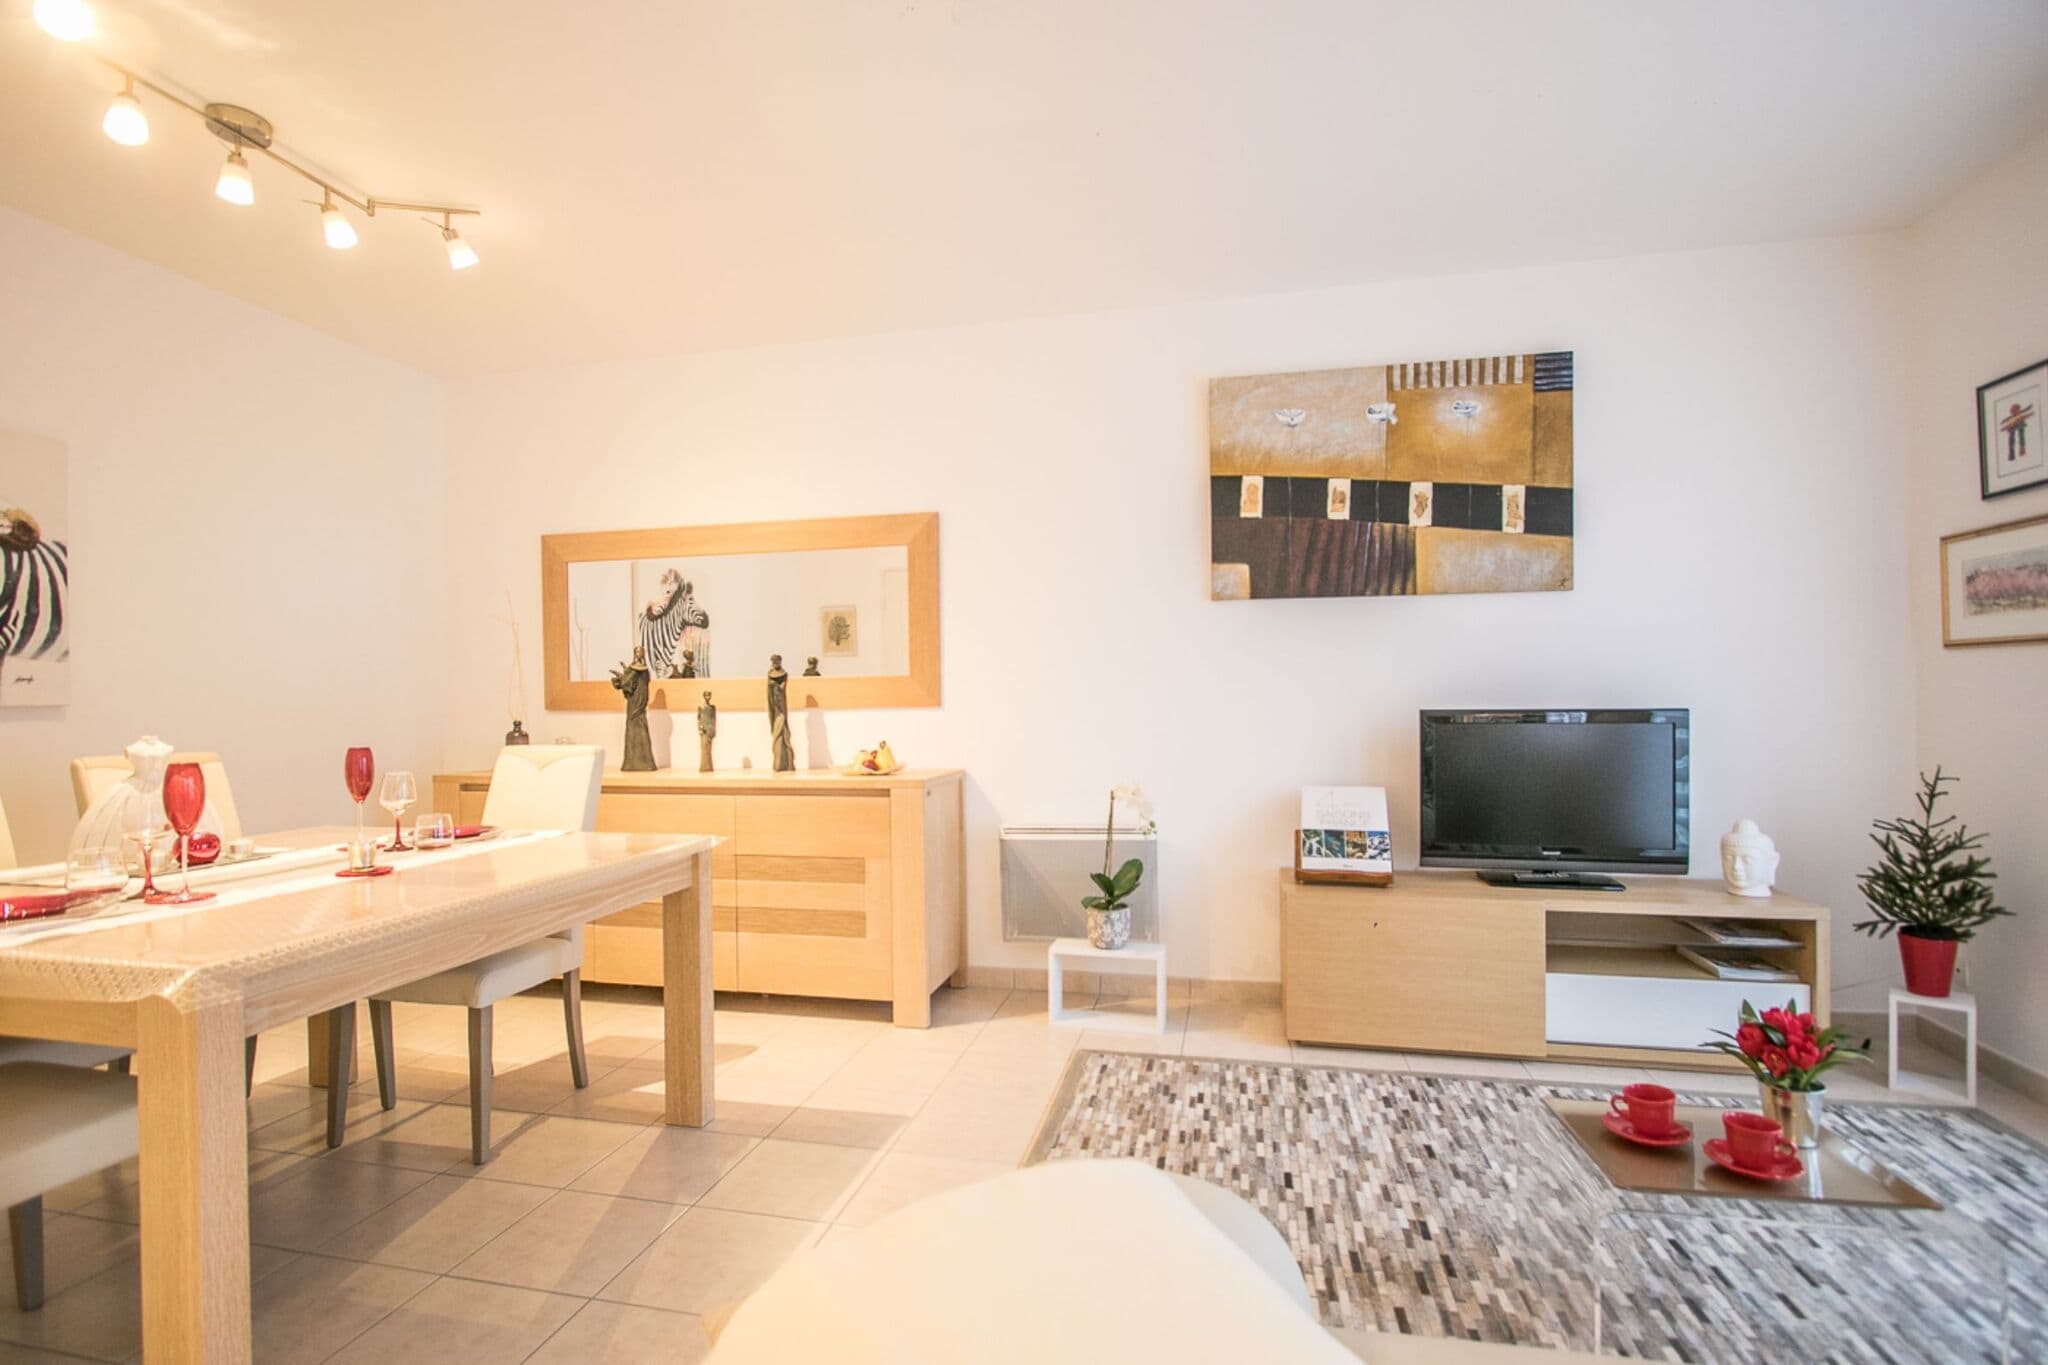 Classy Apartment in Bayeux with Heating Facility